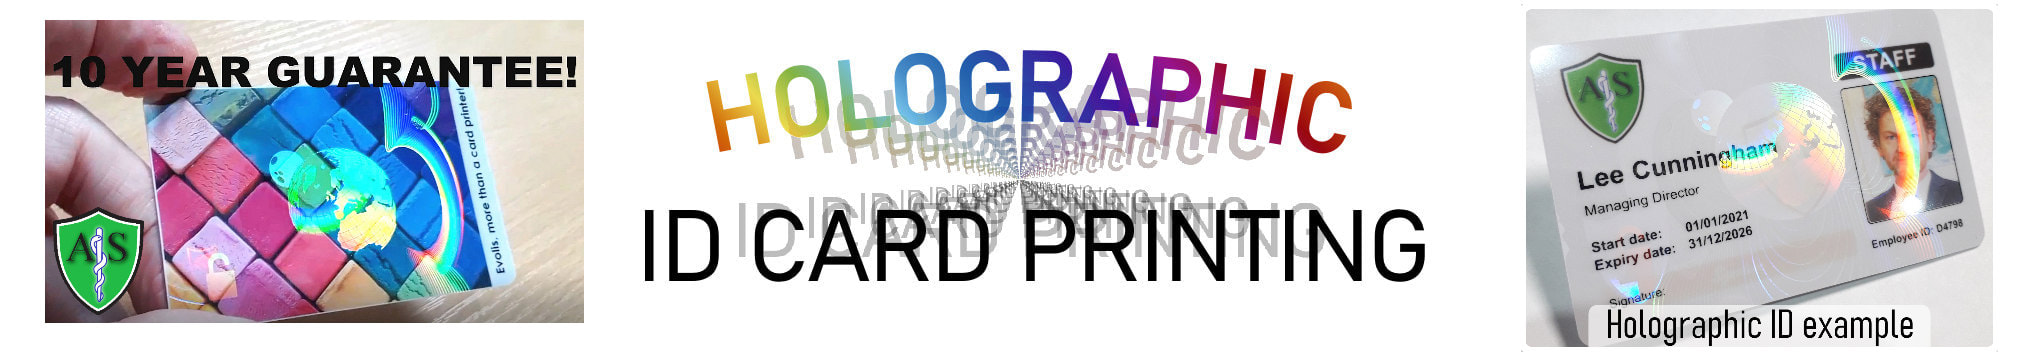 Milton Keynes holographic ID card print service. Employee Identity cards with hologram or holograph security mark.